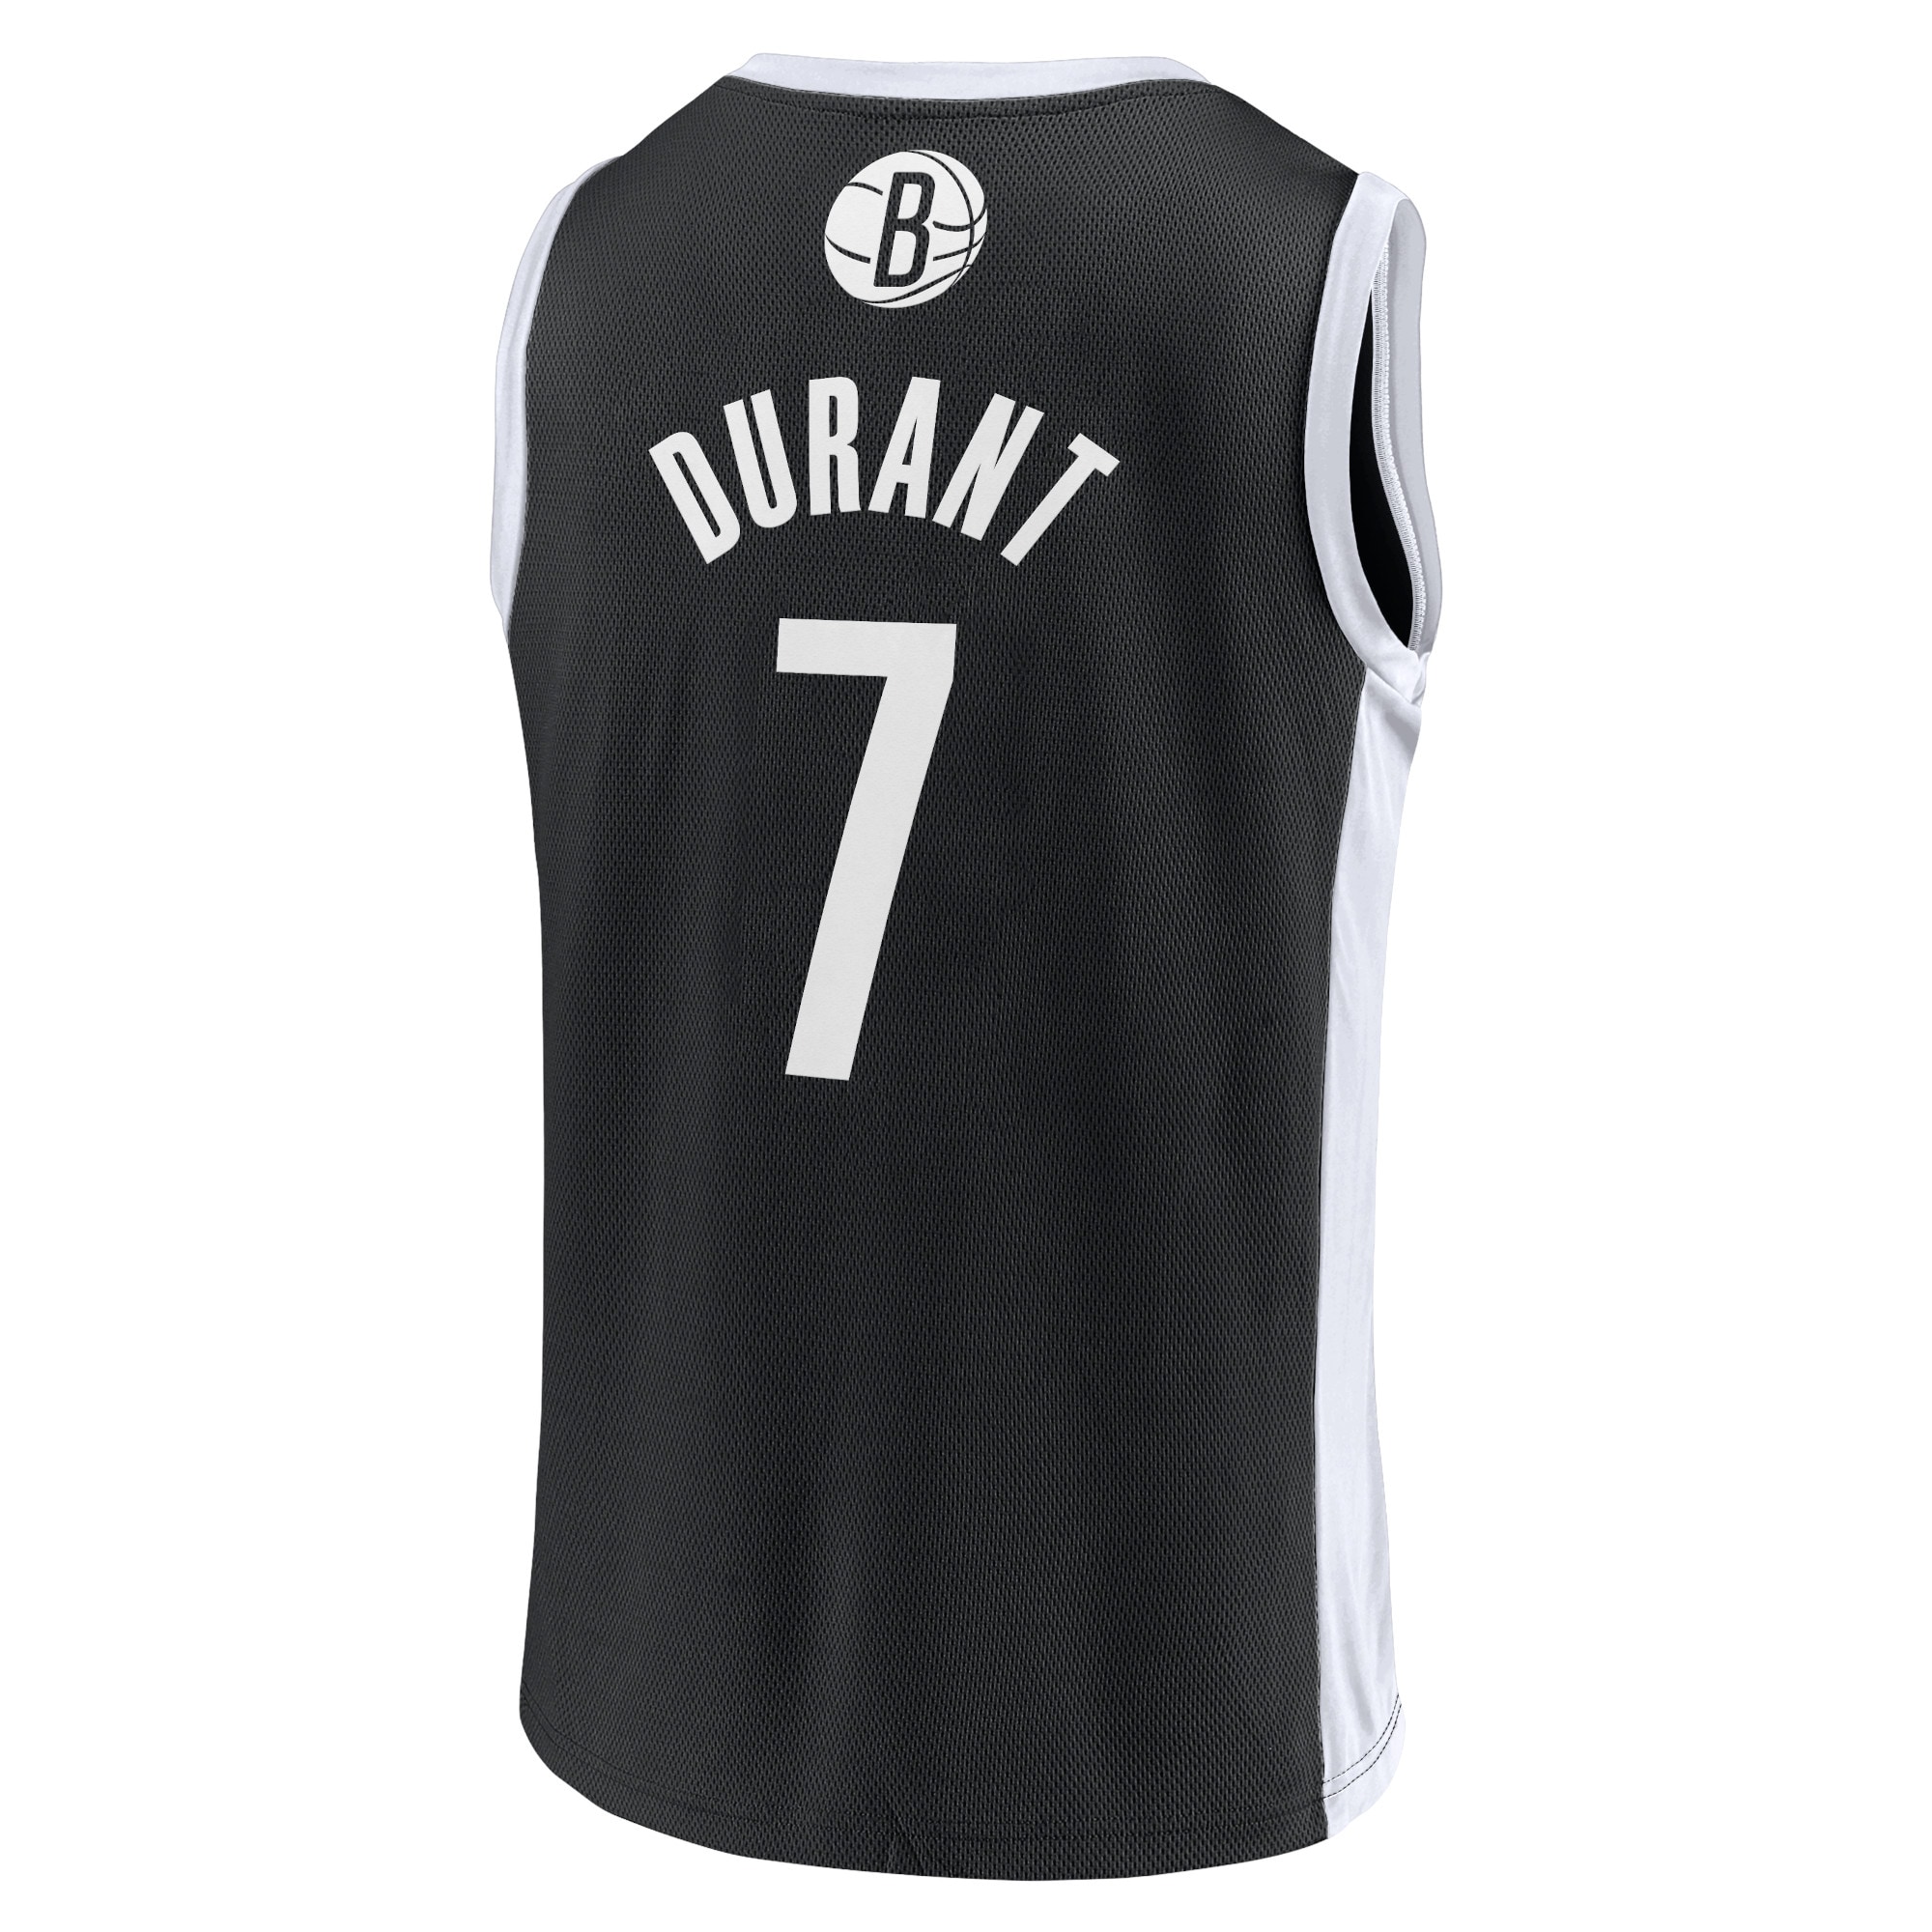 Men's Fanatics Branded Kevin Durant Black Brooklyn Nets Player Jersey - image 3 of 3